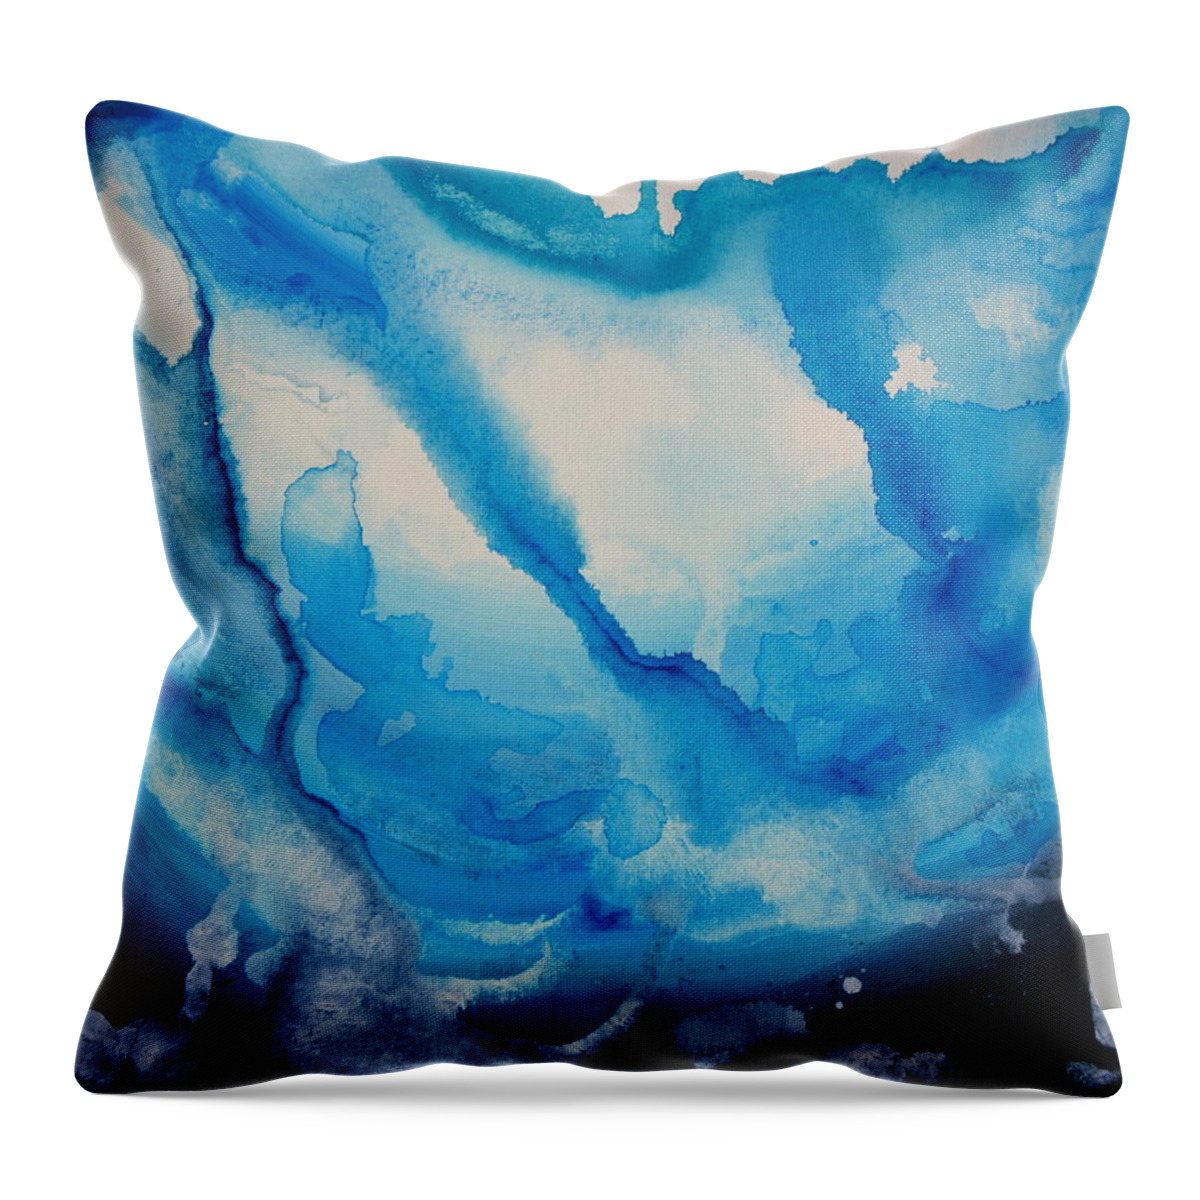 Abstract Art Throw Pillow featuring the painting Blue Abstract by Shiela Gosselin